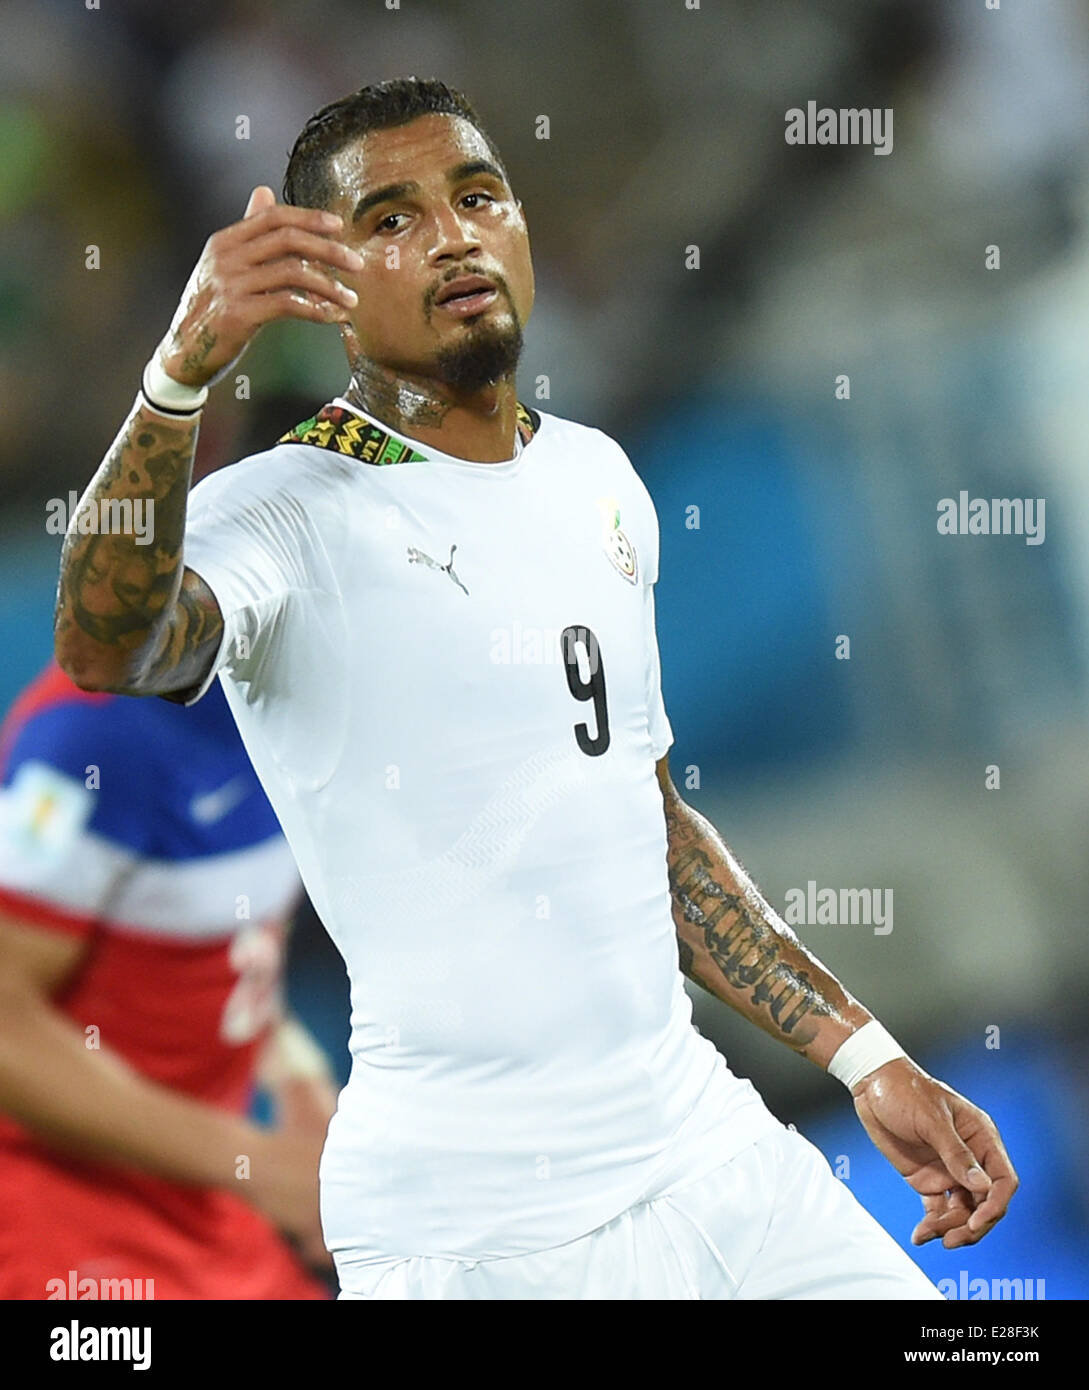 Natal, Brazil. 16th June, 2014. Kevin Prince Boateng of Ghana reacts during the FIFA World Cup 2014 group G preliminary round match between Ghana and the USA at the Estadio Arena das Dunas Stadium in Natal, Brazil, 16 June 2014. Credit:  dpa picture alliance/Alamy Live News Stock Photo